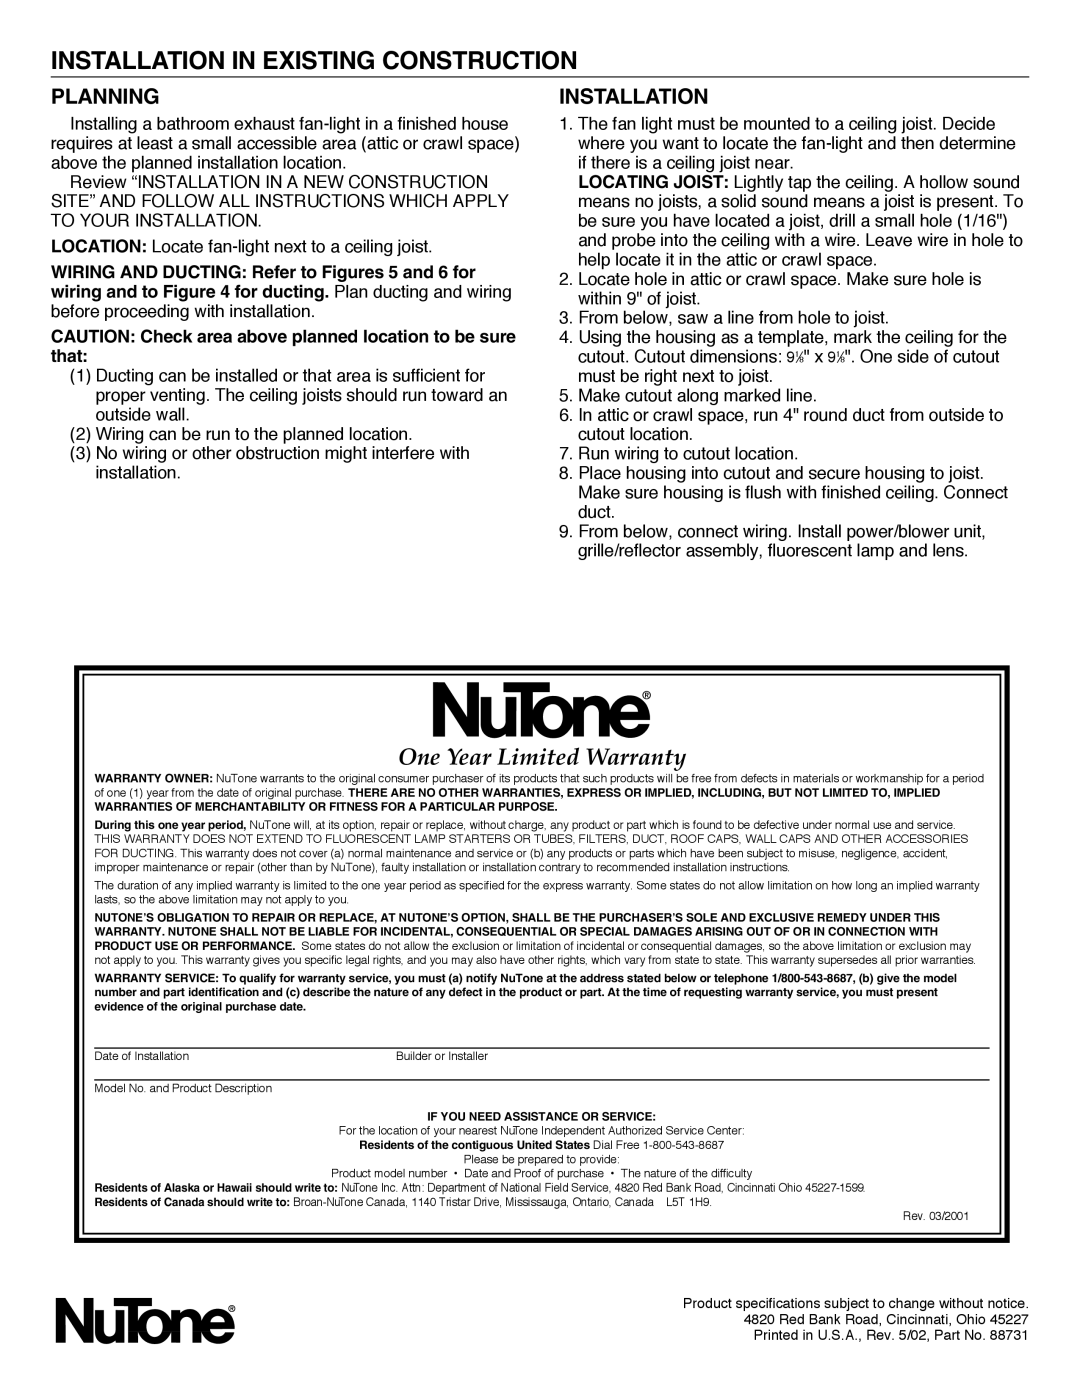 NuTone 770F installation instructions Installation in Existing Construction, One Year Limited Warranty, Planning 